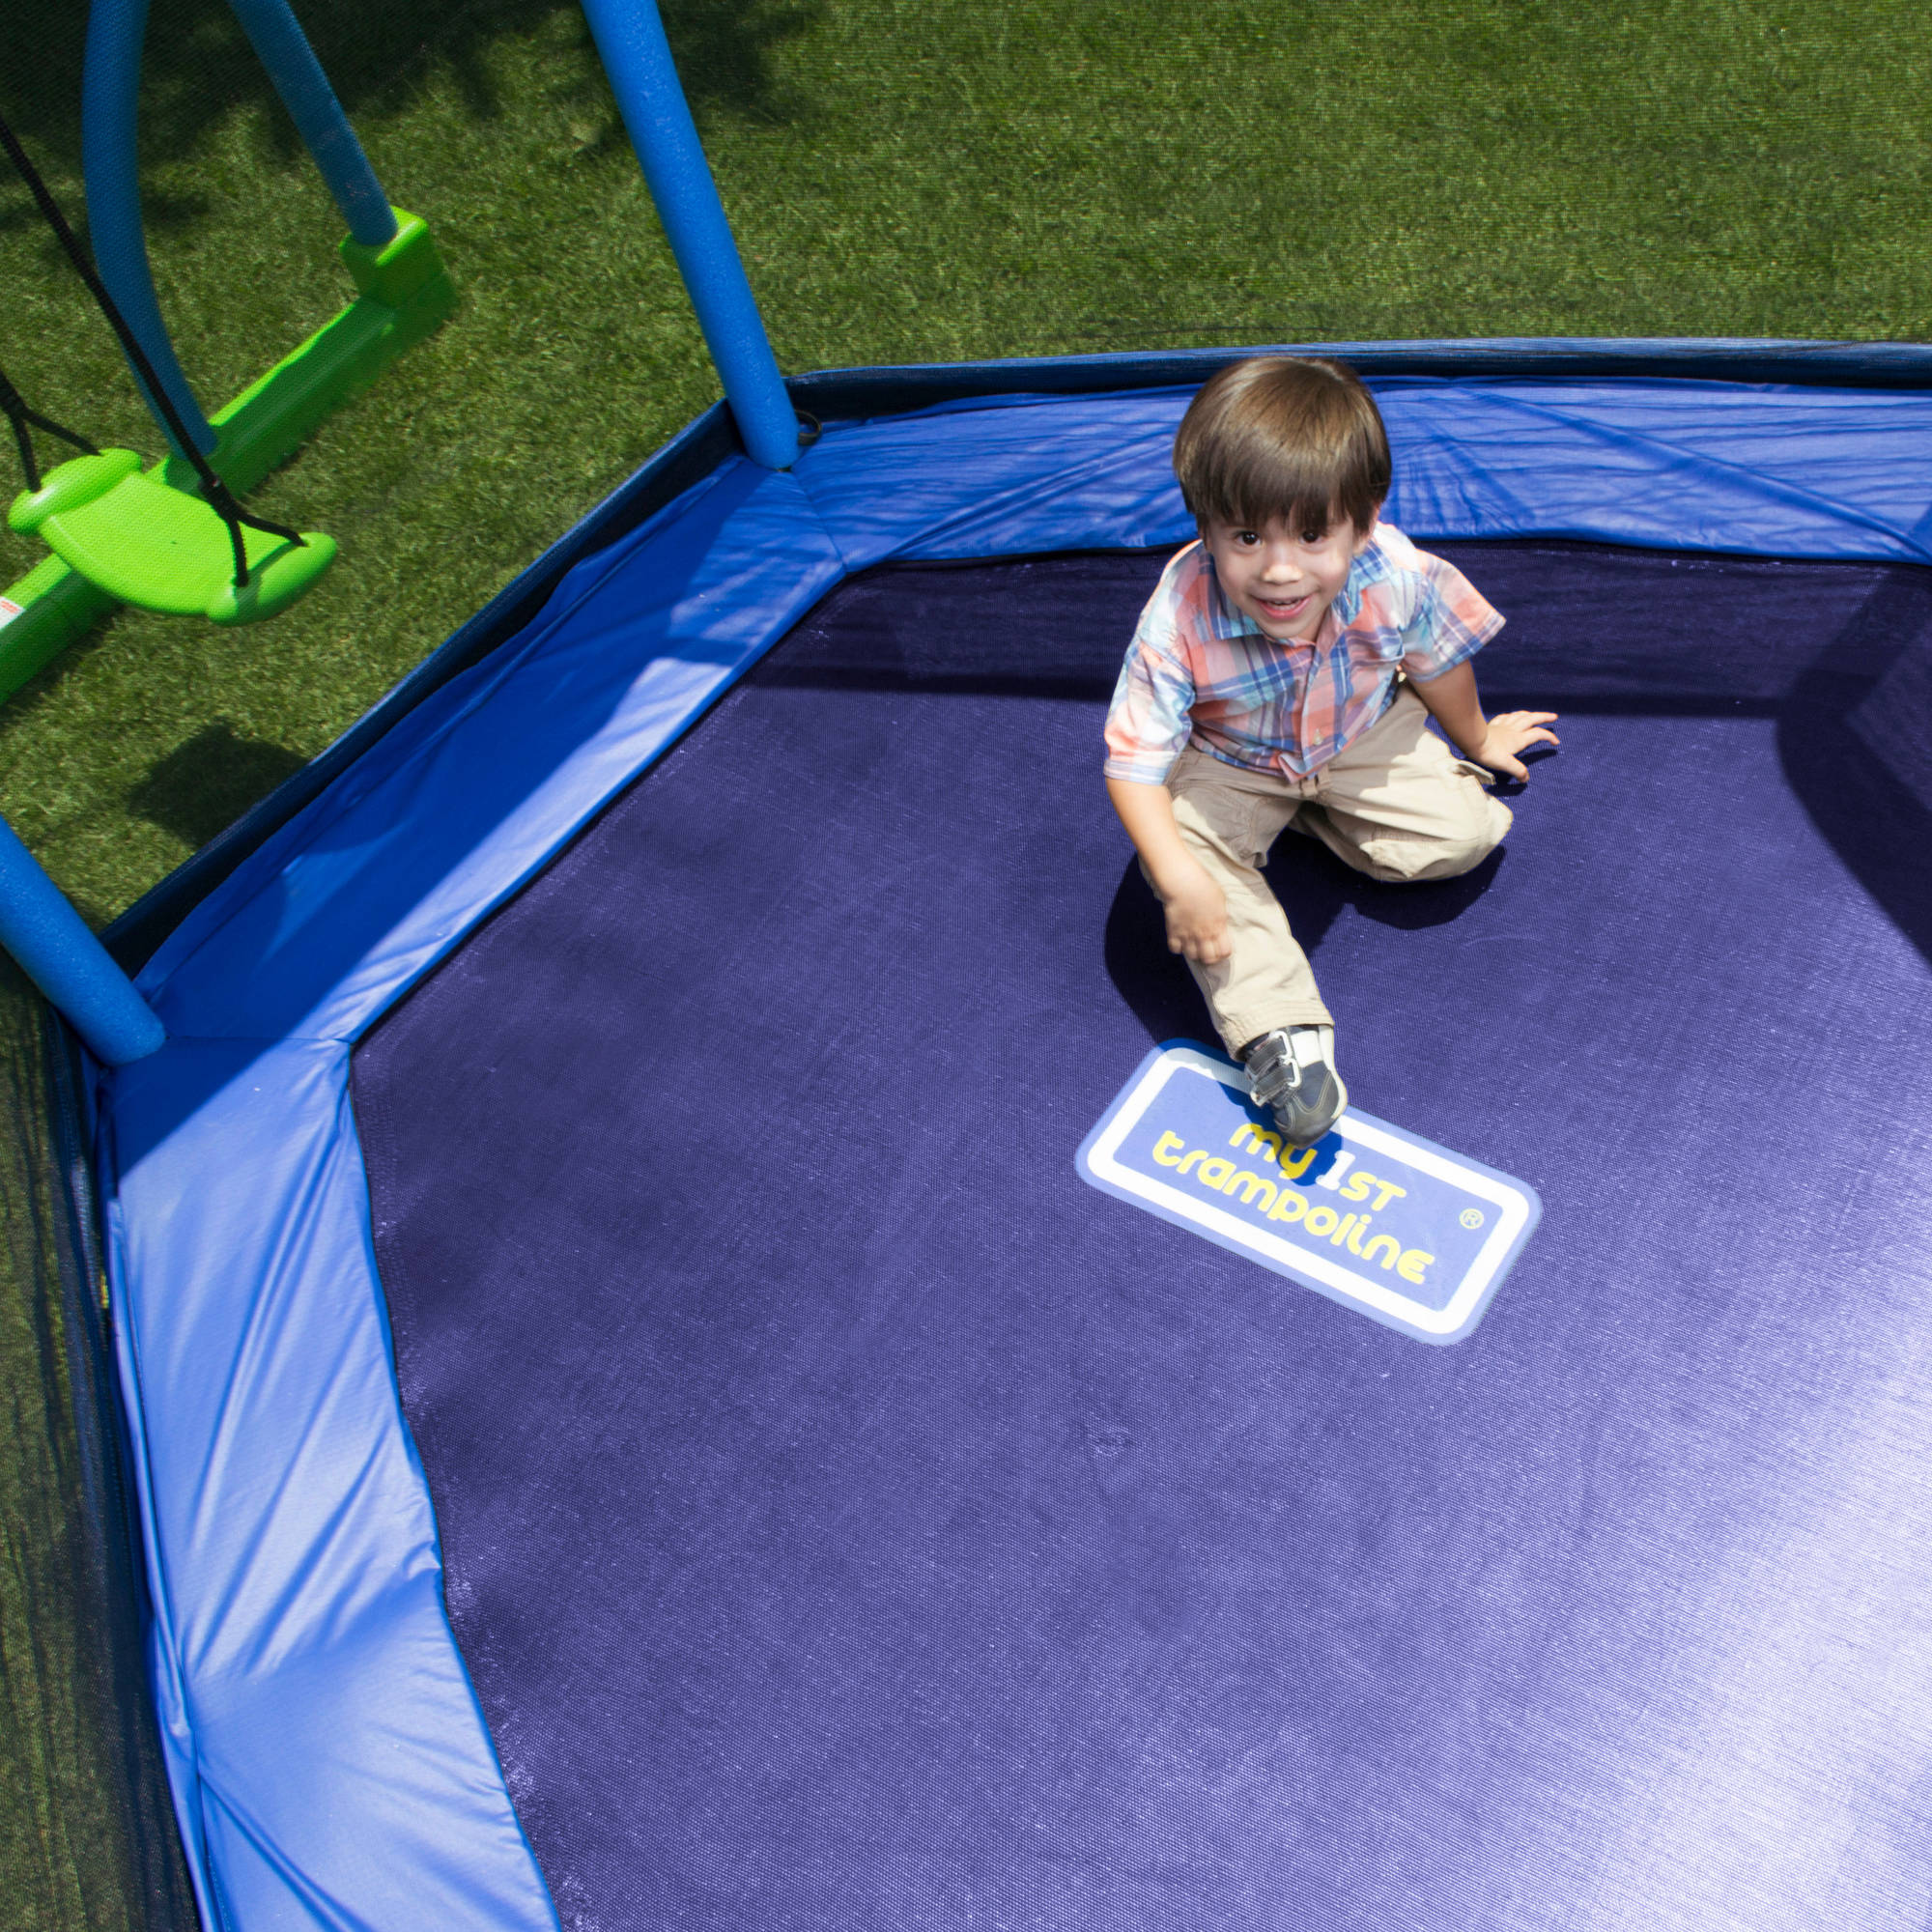 Bounce Pro My First Jump 7' Trampoline and Swing, Blue/Green - image 4 of 14